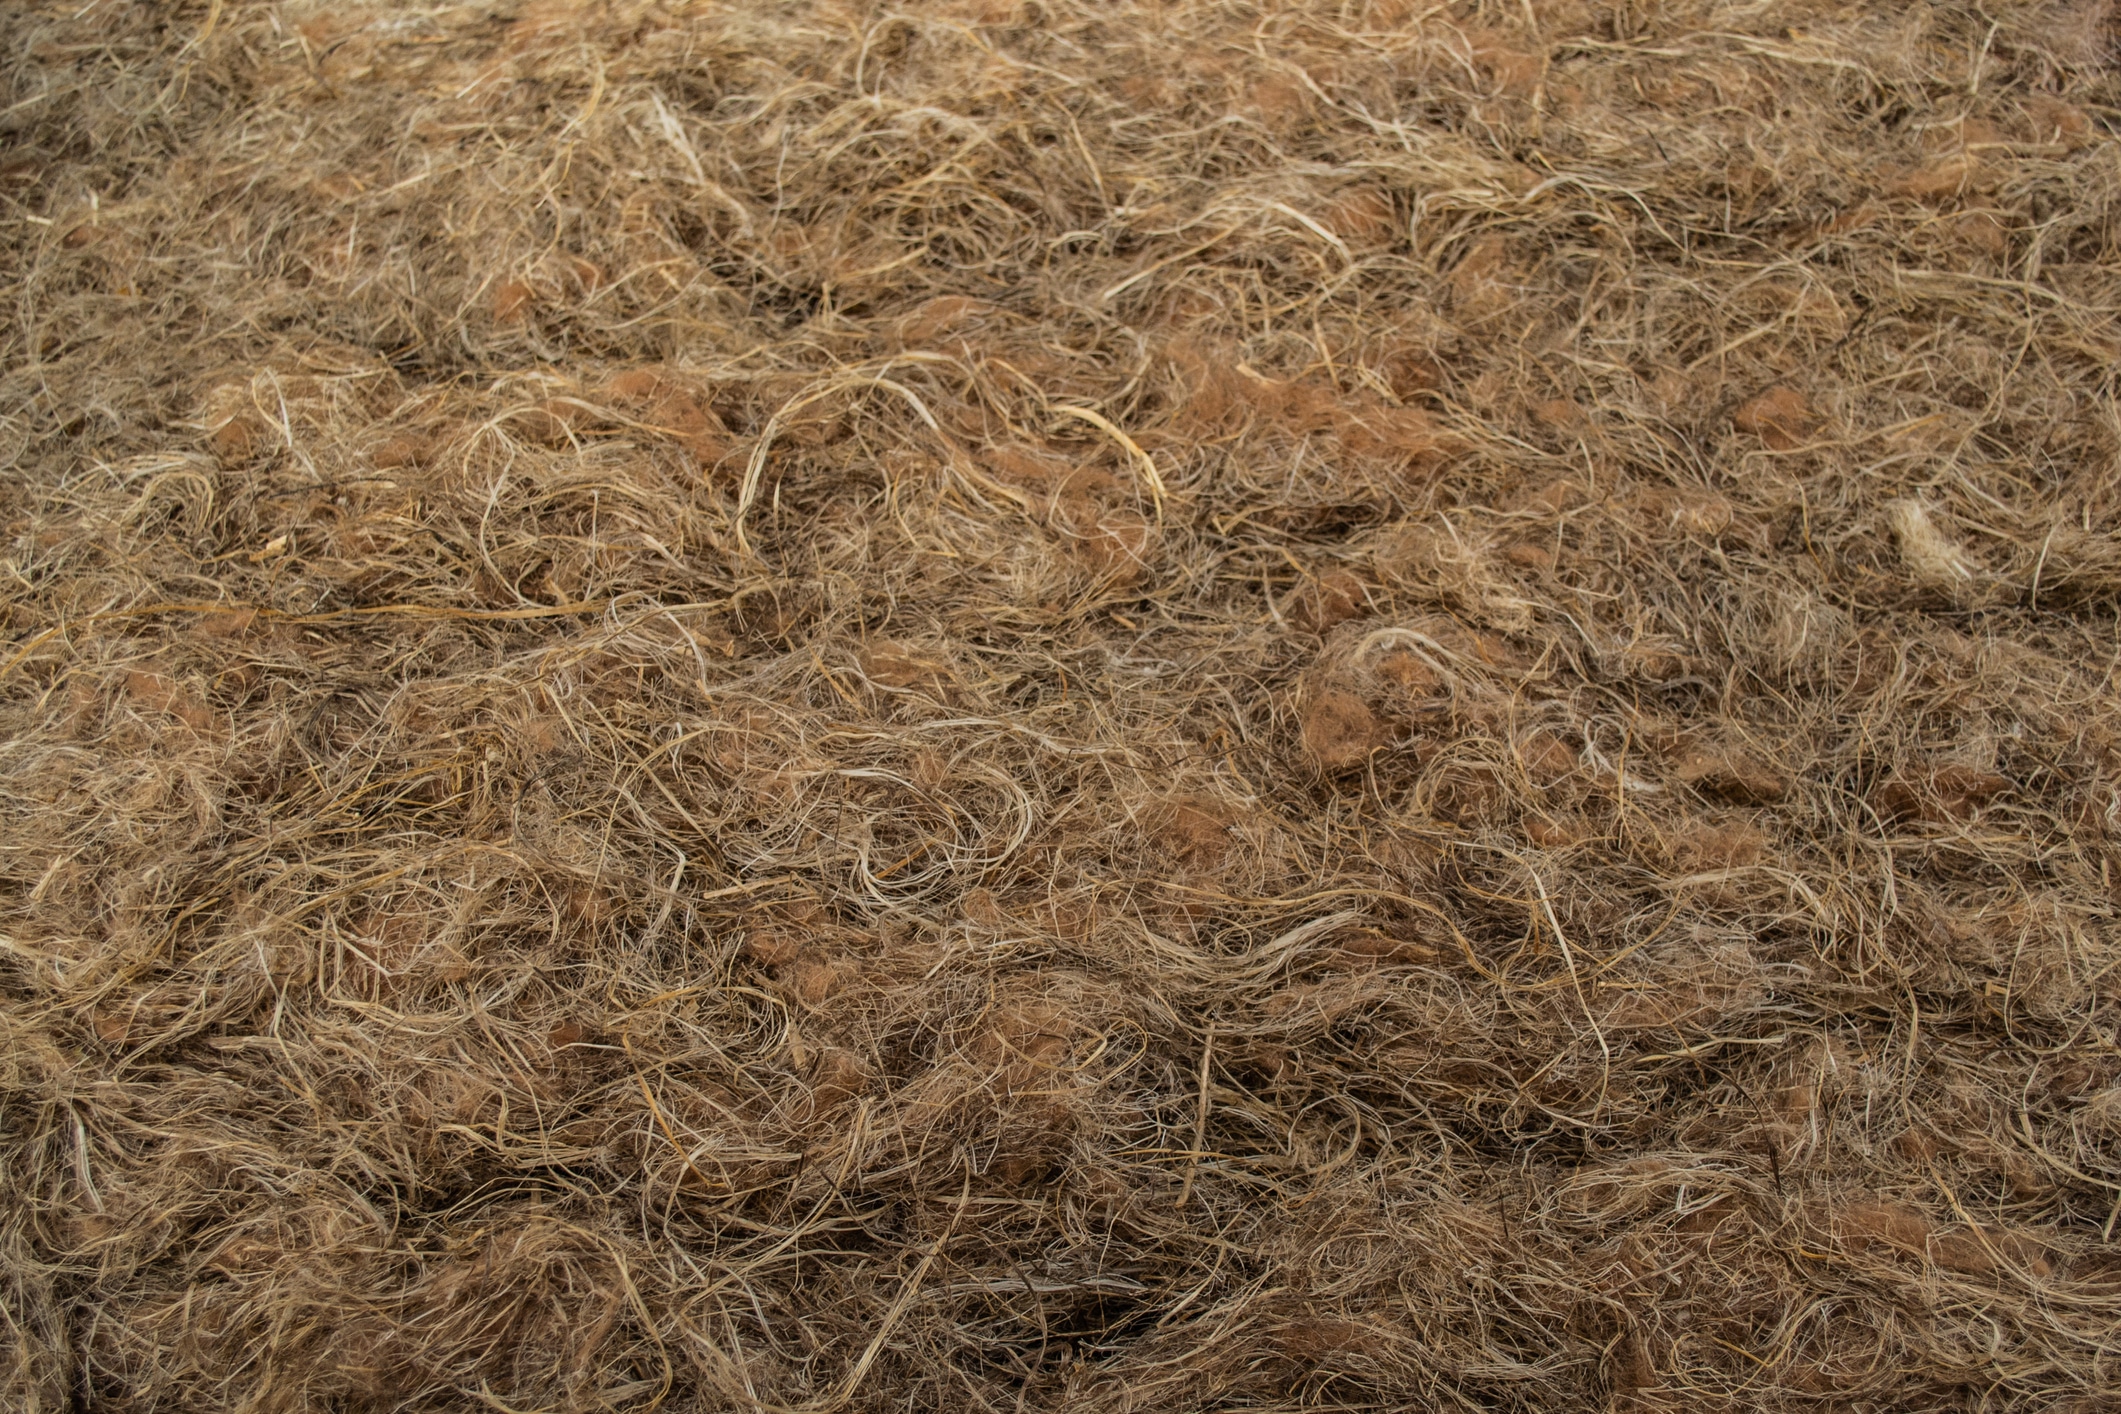 Close-up of coarse bast fiber obtained from the stems of cannabis.